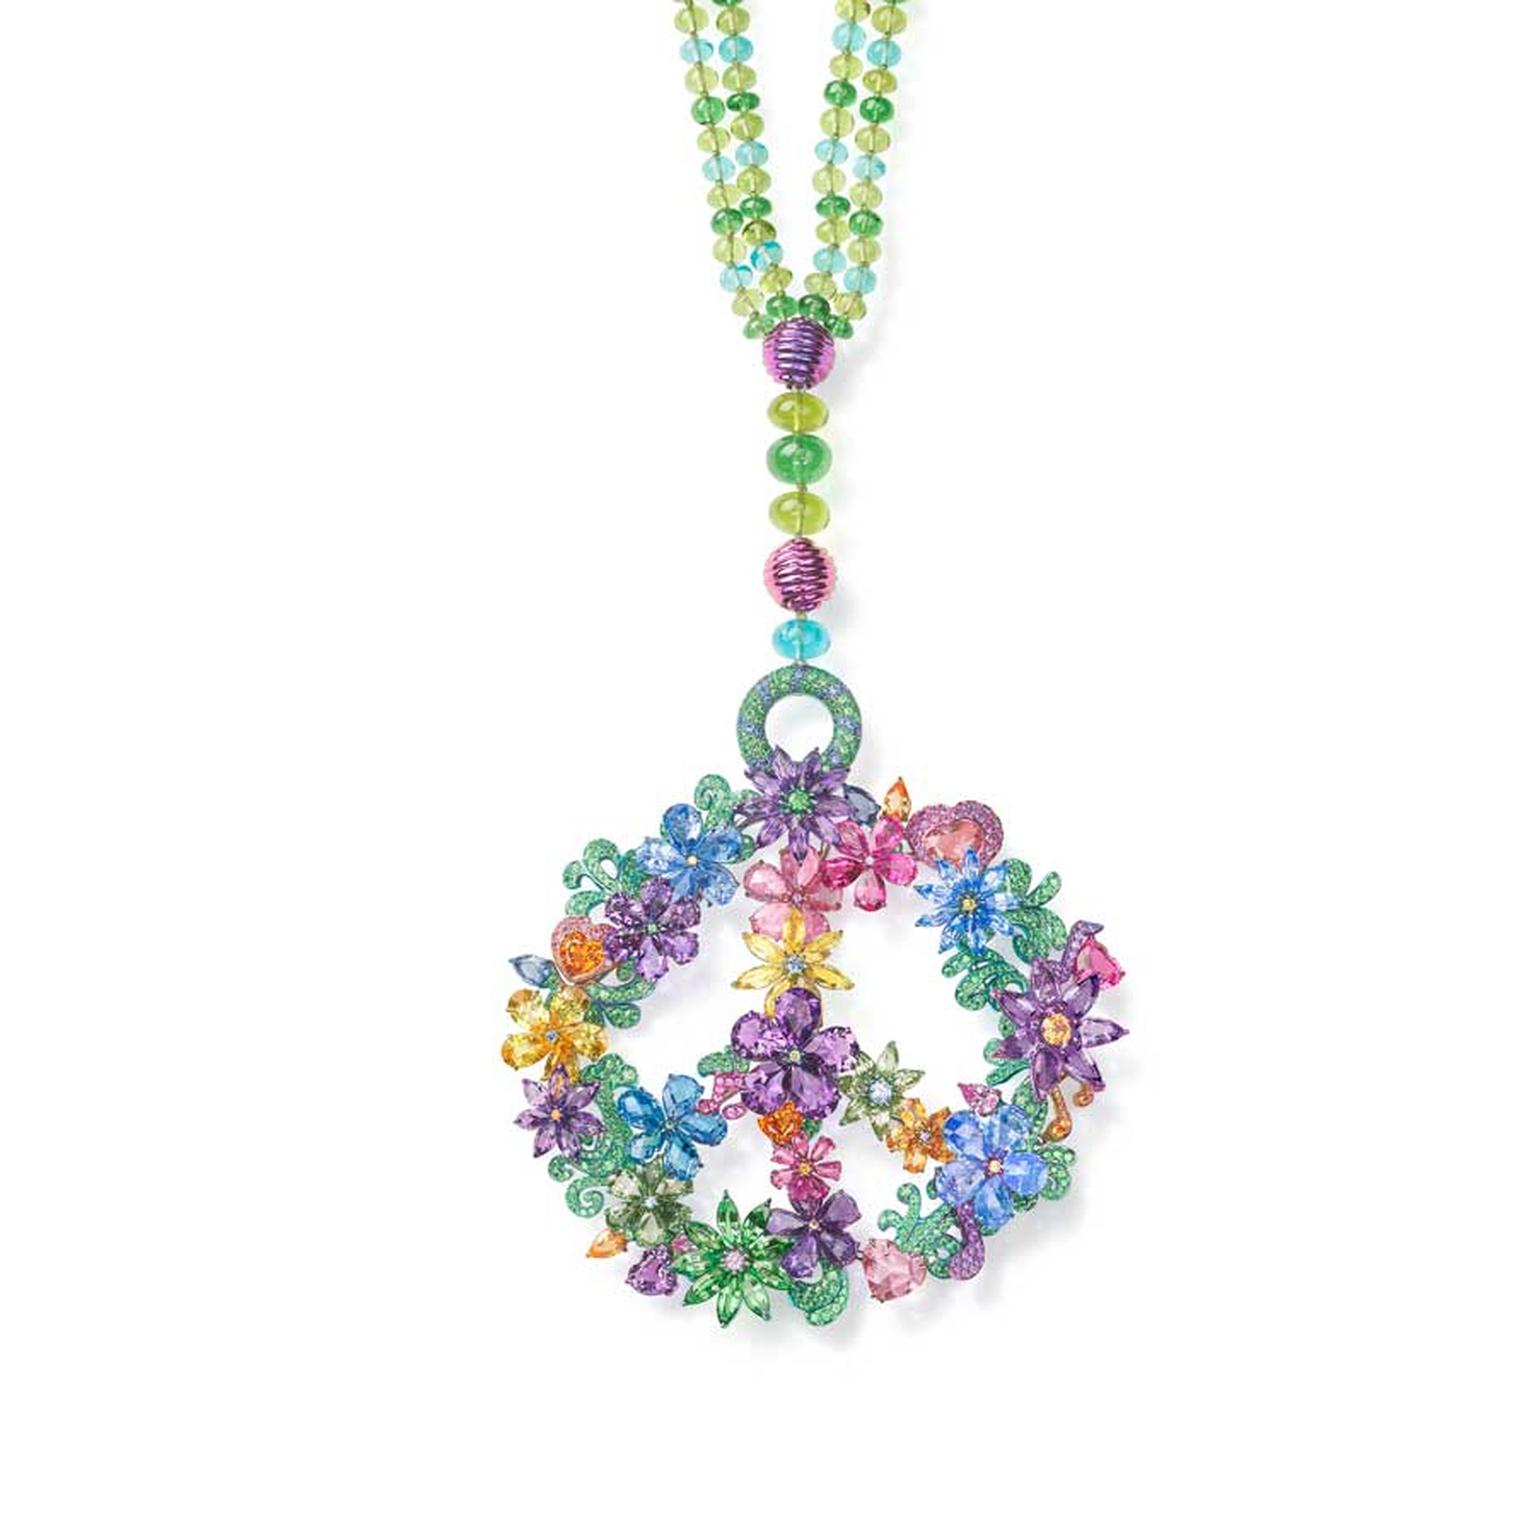 Chopard Peace and Love necklace Chopard Loves Cinema Red Carpet 